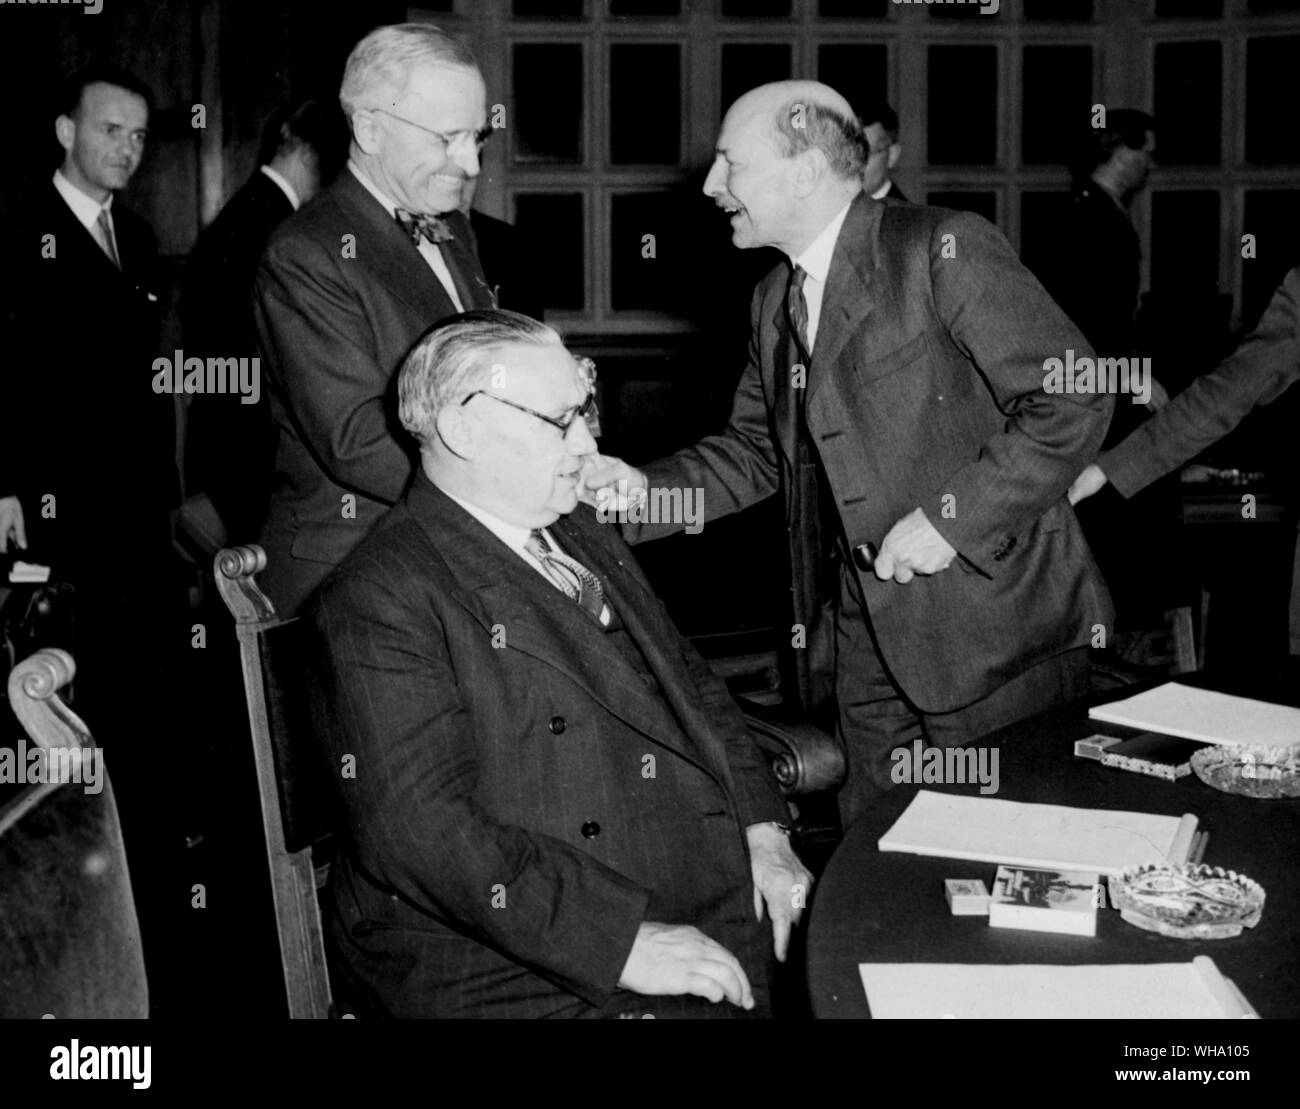 WW2: Potsdam Conference. Truman greets Attlee, with Bevin seated at the Conference table (July 1945). Stock Photo